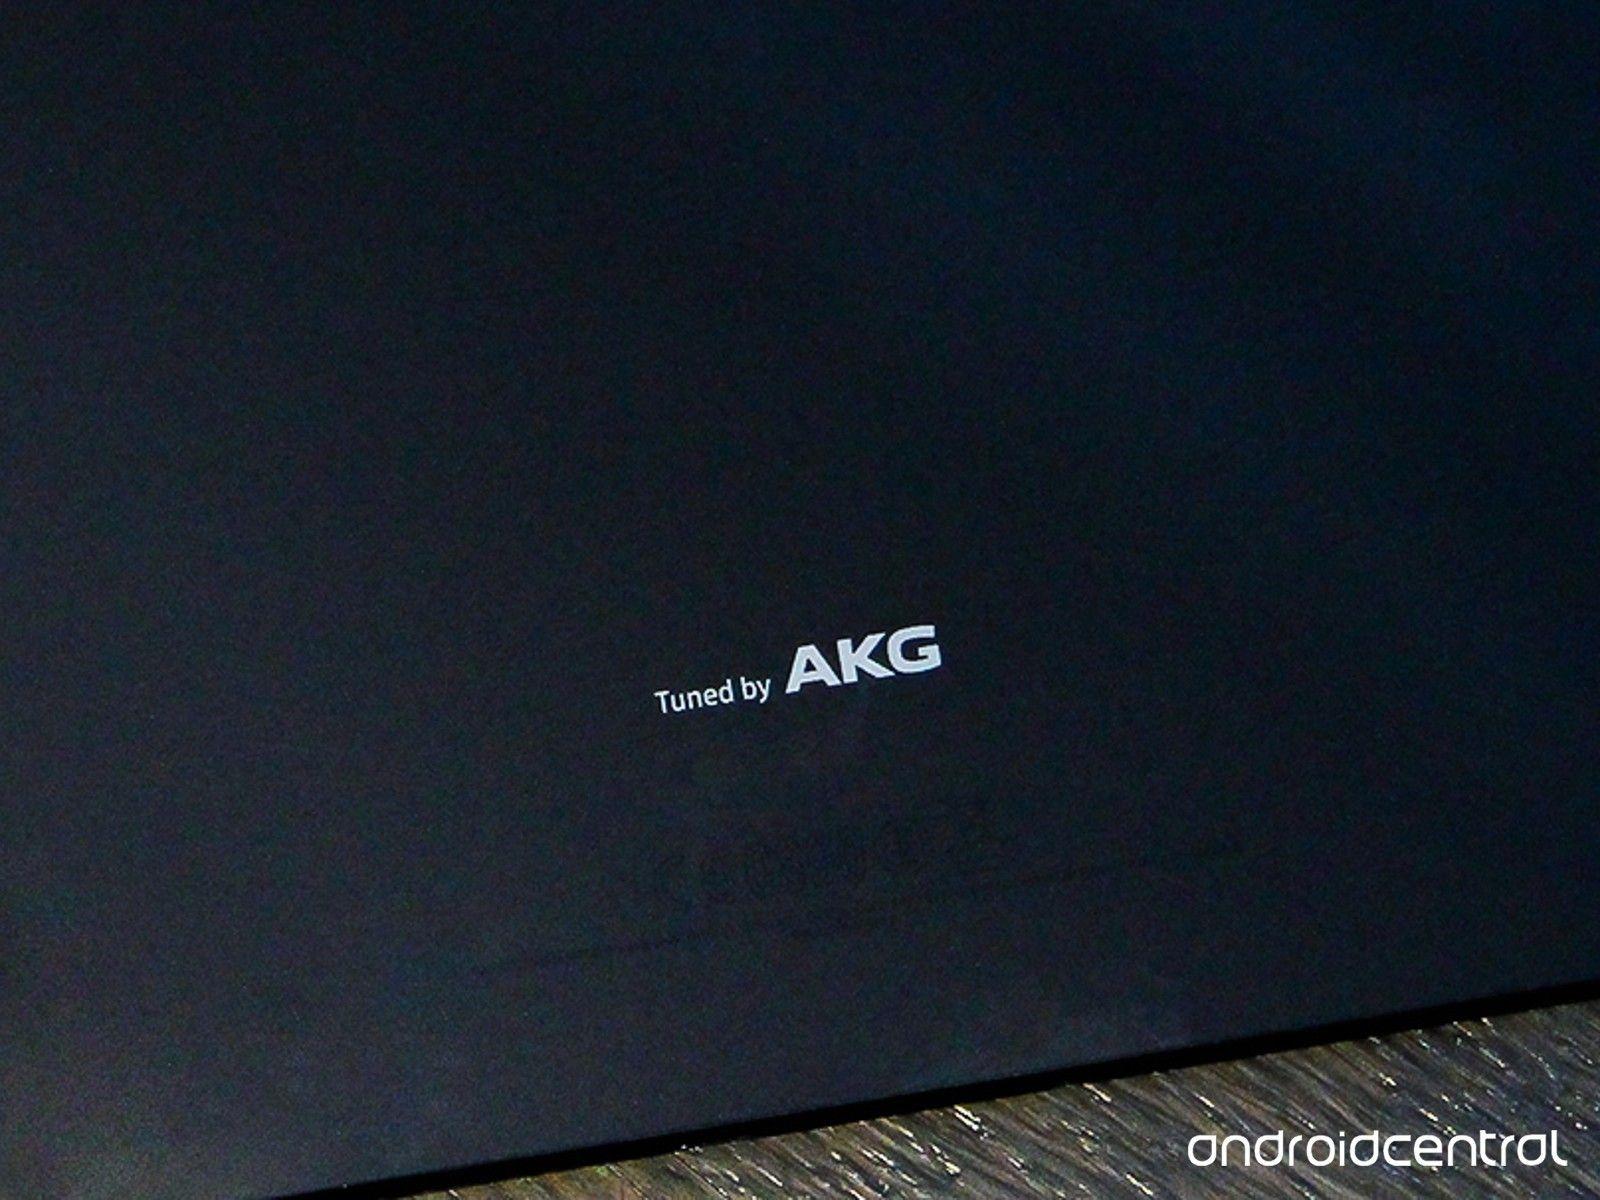 AKG Logo - Samsung Galaxy S8 expected to come with AKG headphones, audio tuning